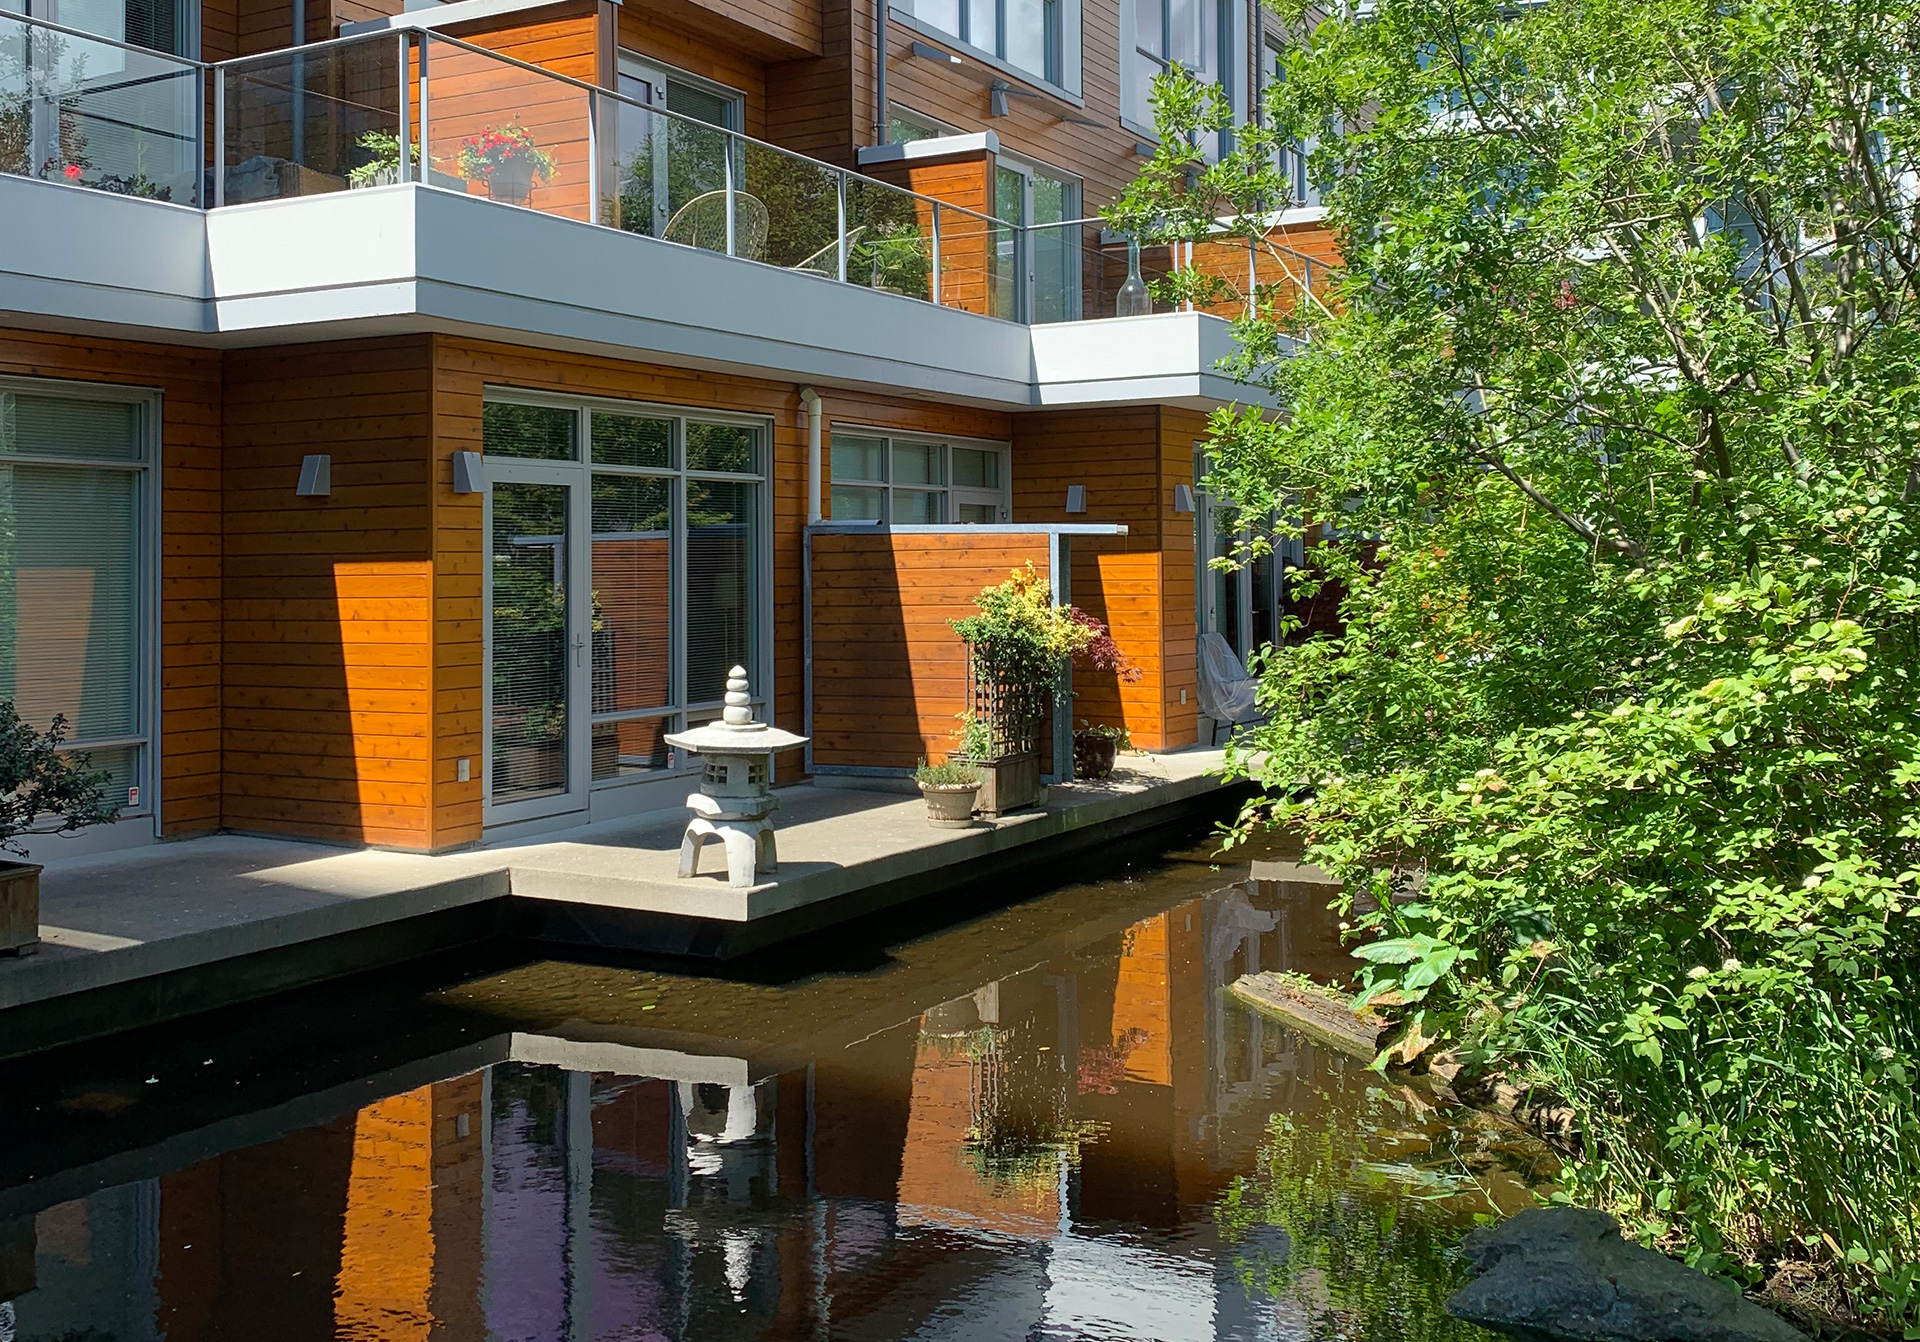 NAM and housing - Dockside Green, Victoria BC - modern wood clad building with lots of greenery and a prominent water feature in the foreground